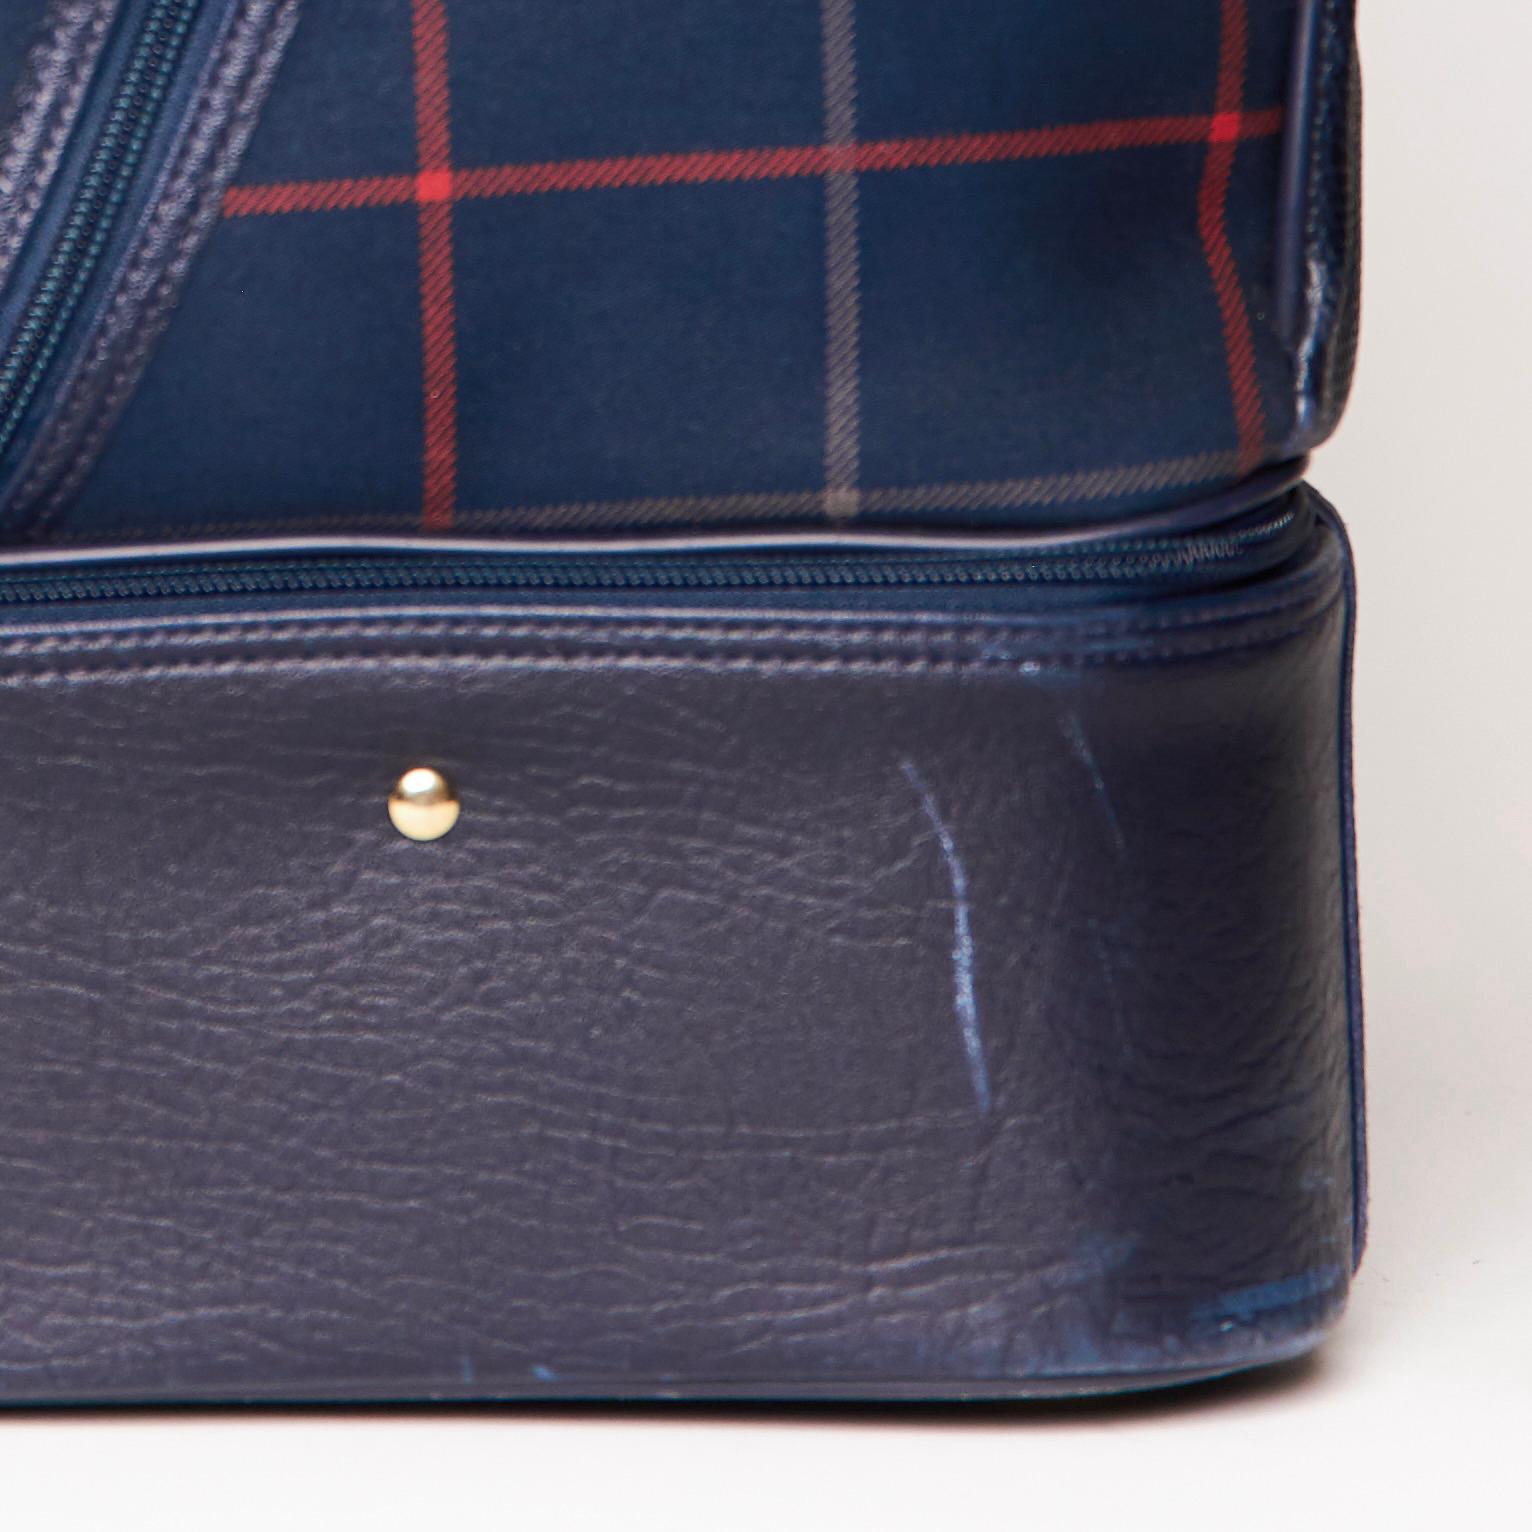 Burberry Navy Leather & Plaid Canvas Top Handle Travel Bag 2